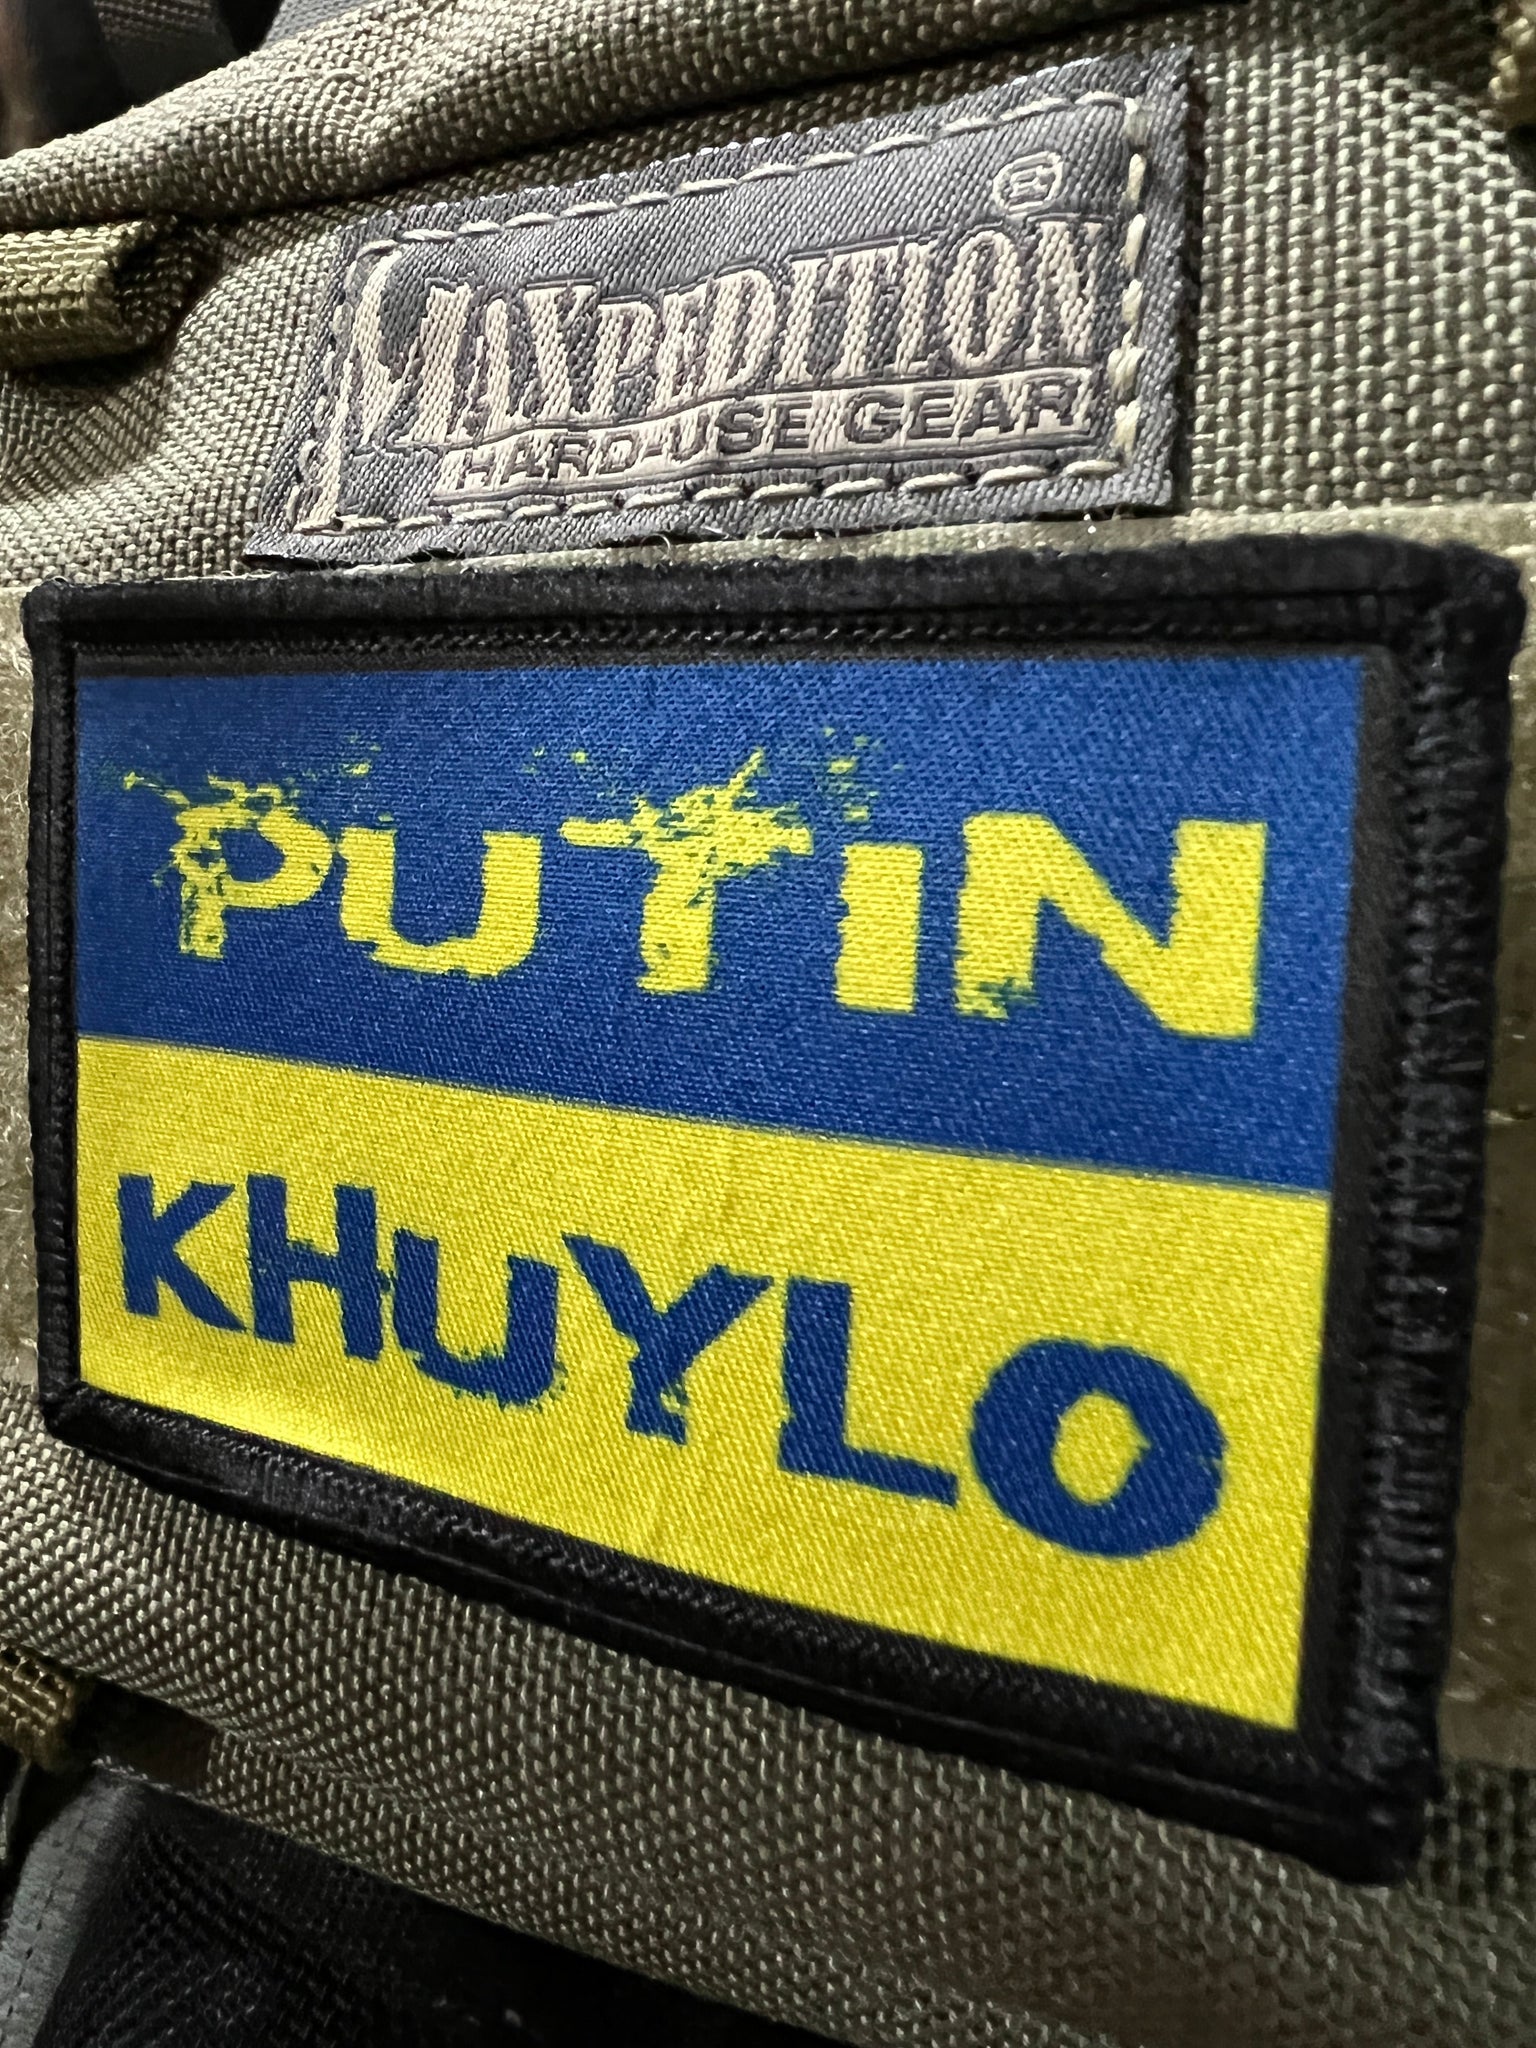 Putin Khuylo Ukraine Morale Patch Morale Patches Redheaded T Shirts 